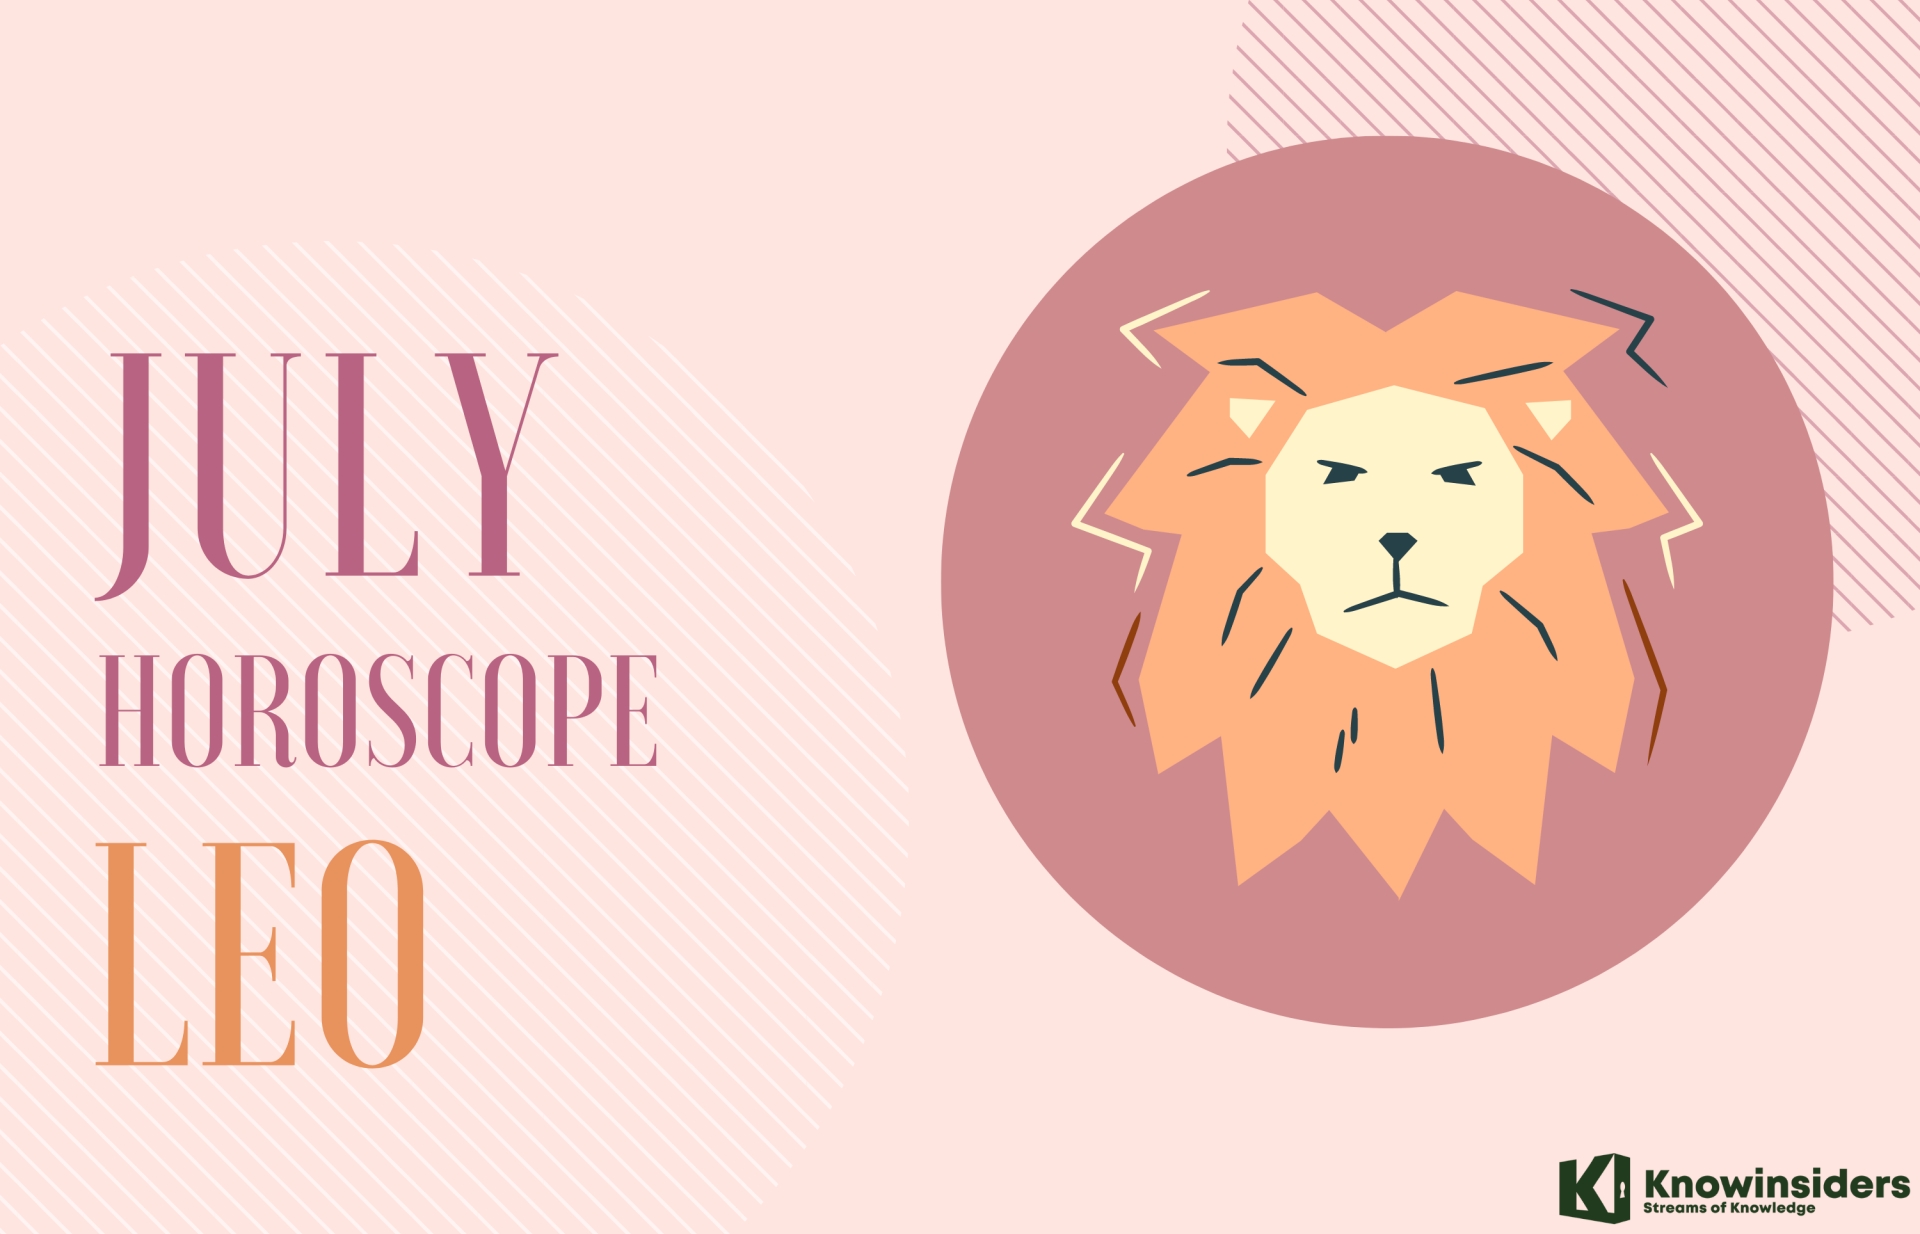 LEO July 2022 Horoscope: Monthly Prediction for Love, Career, Money and Health